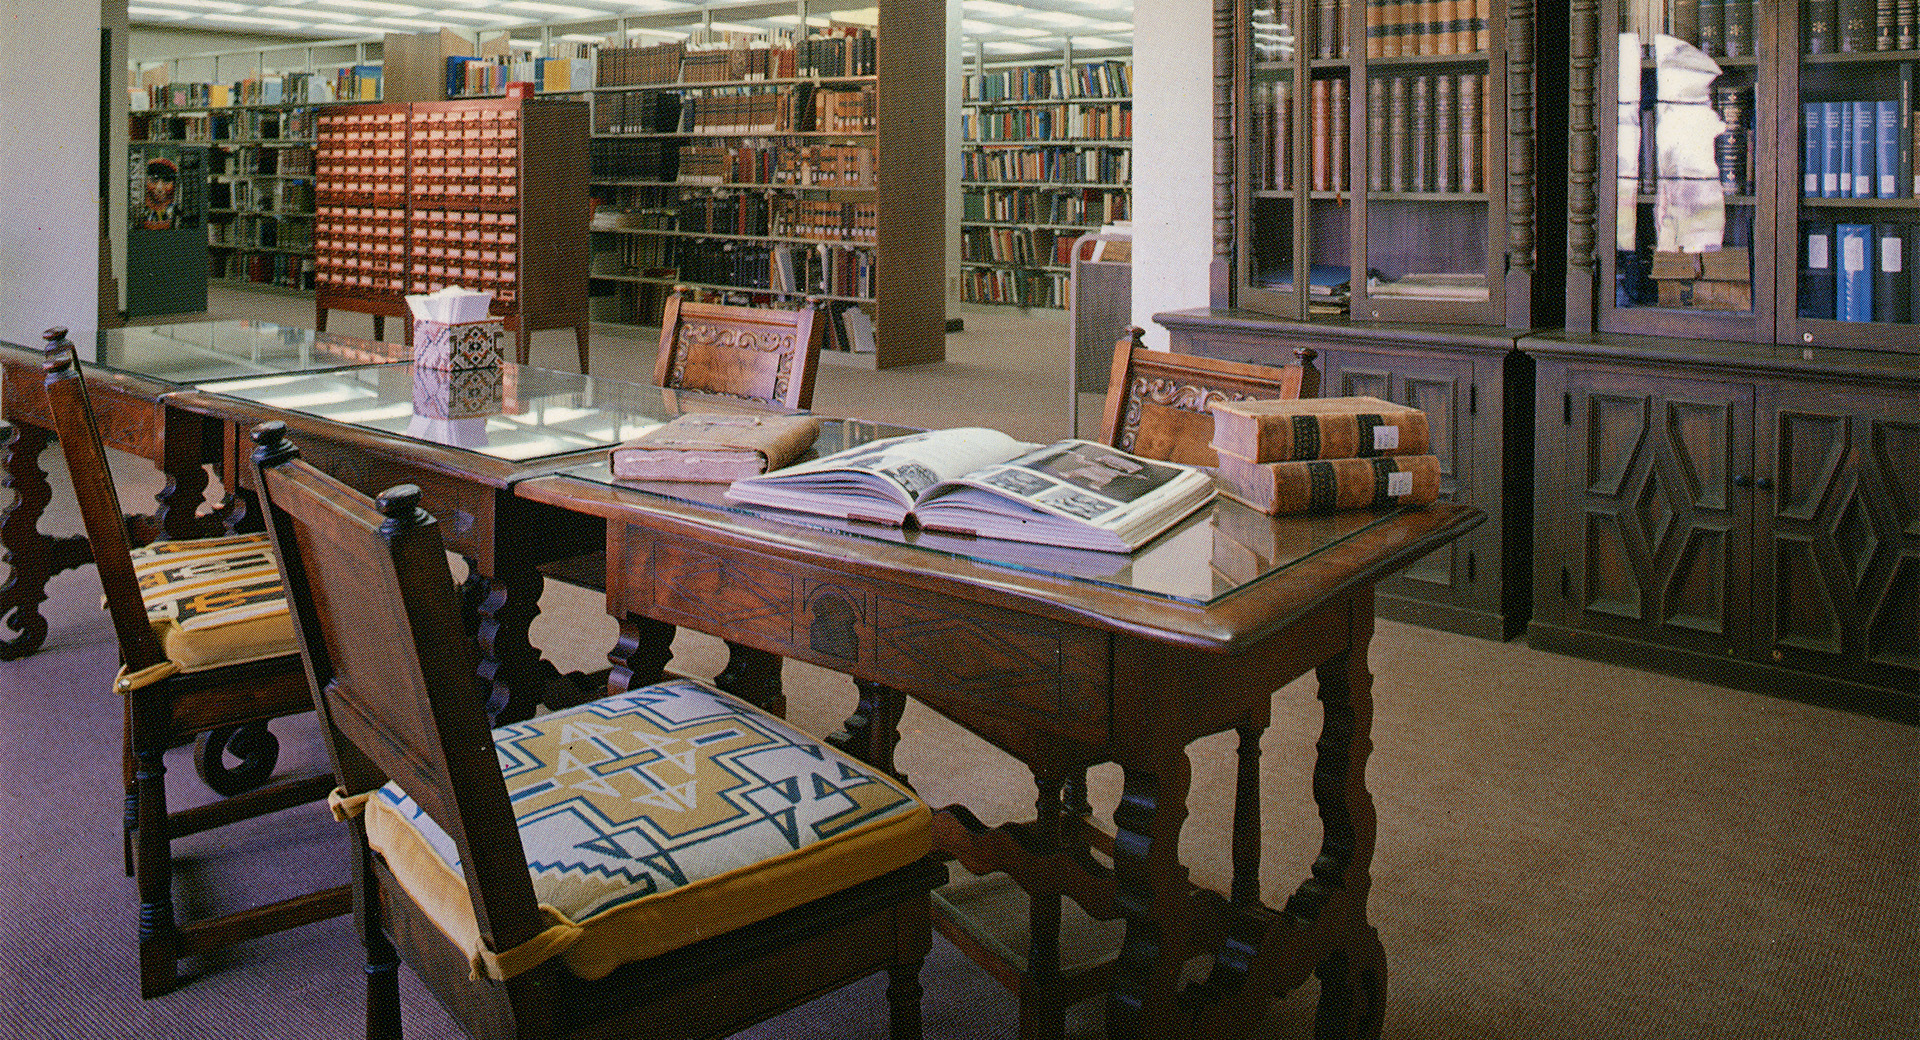 A table with books on it in a library.